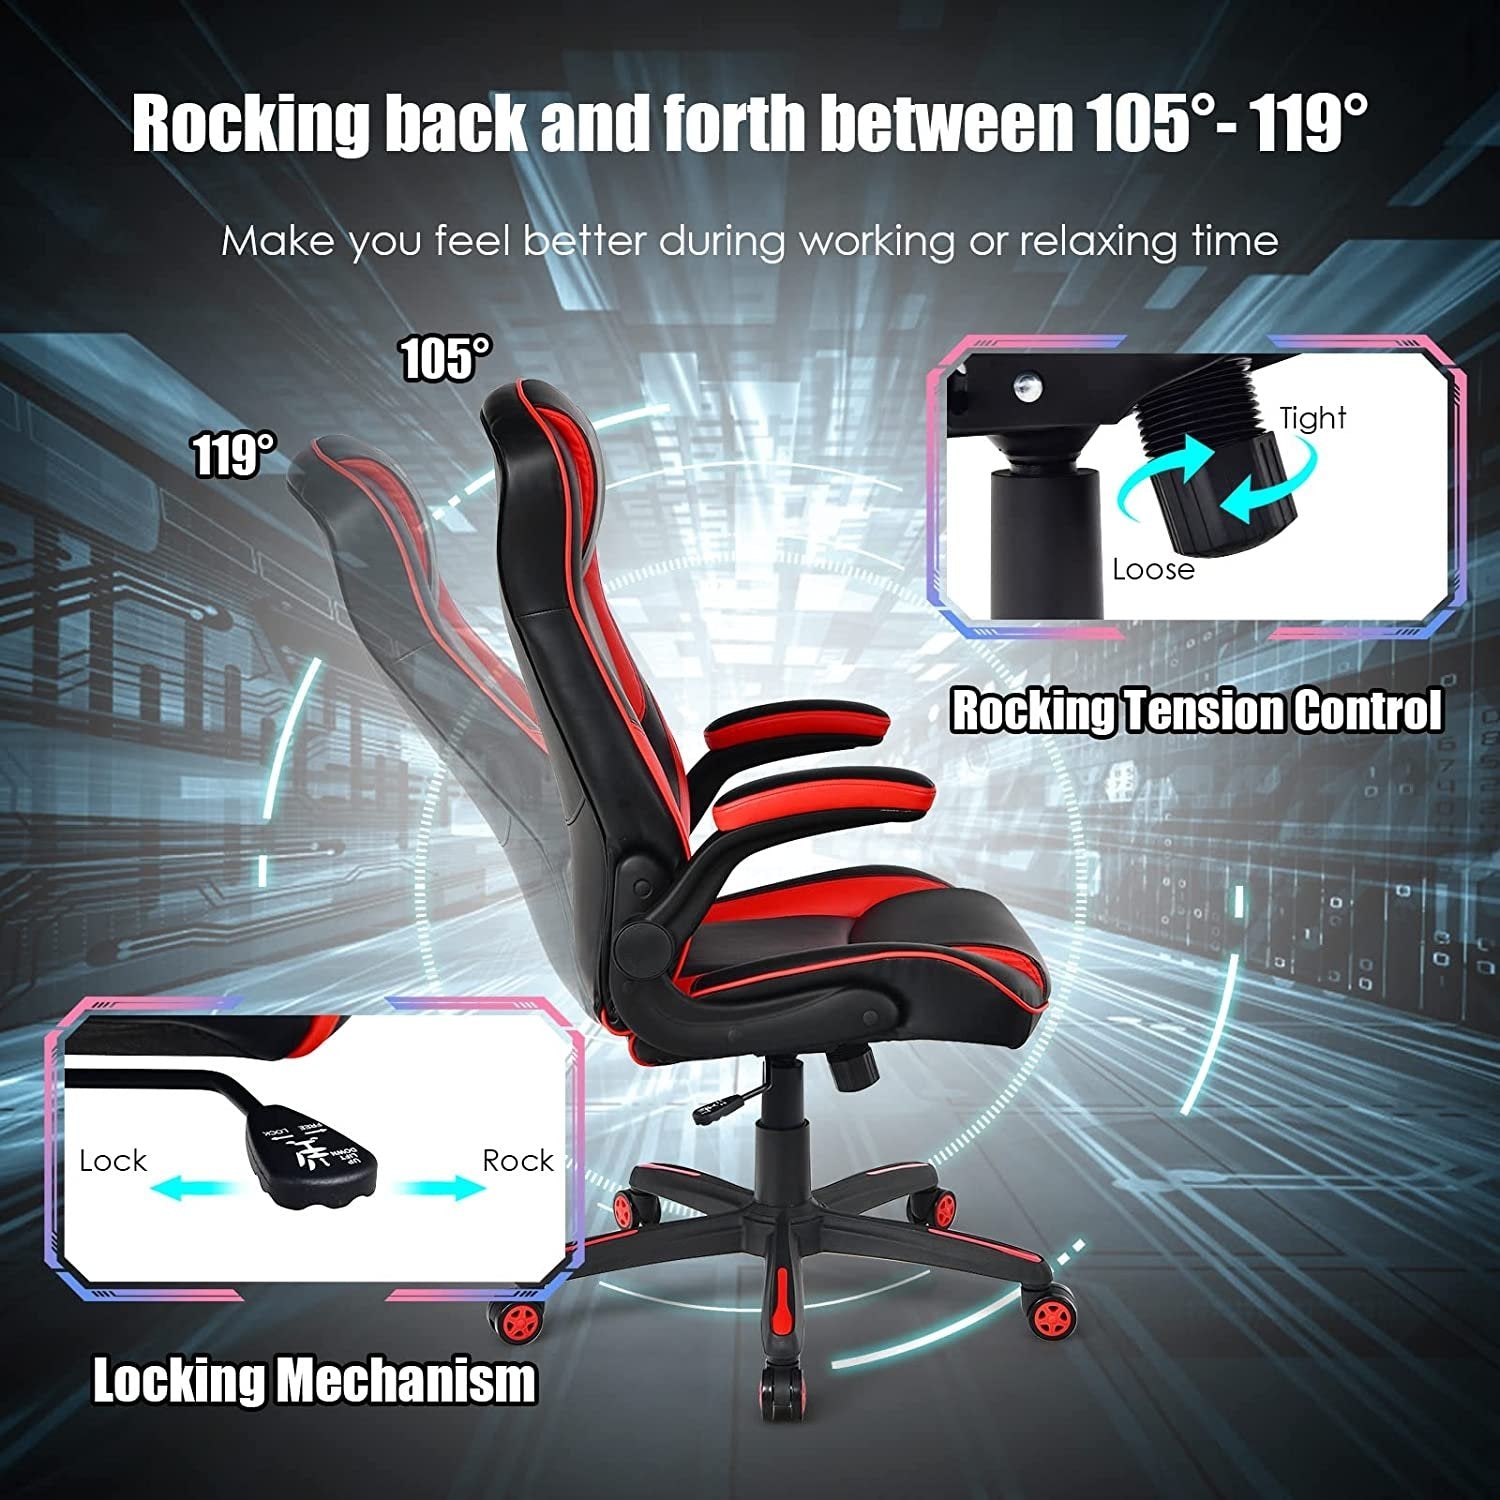 Racing Style Office Chair with PVC and PU Leather Seat, Red - Gallery Canada